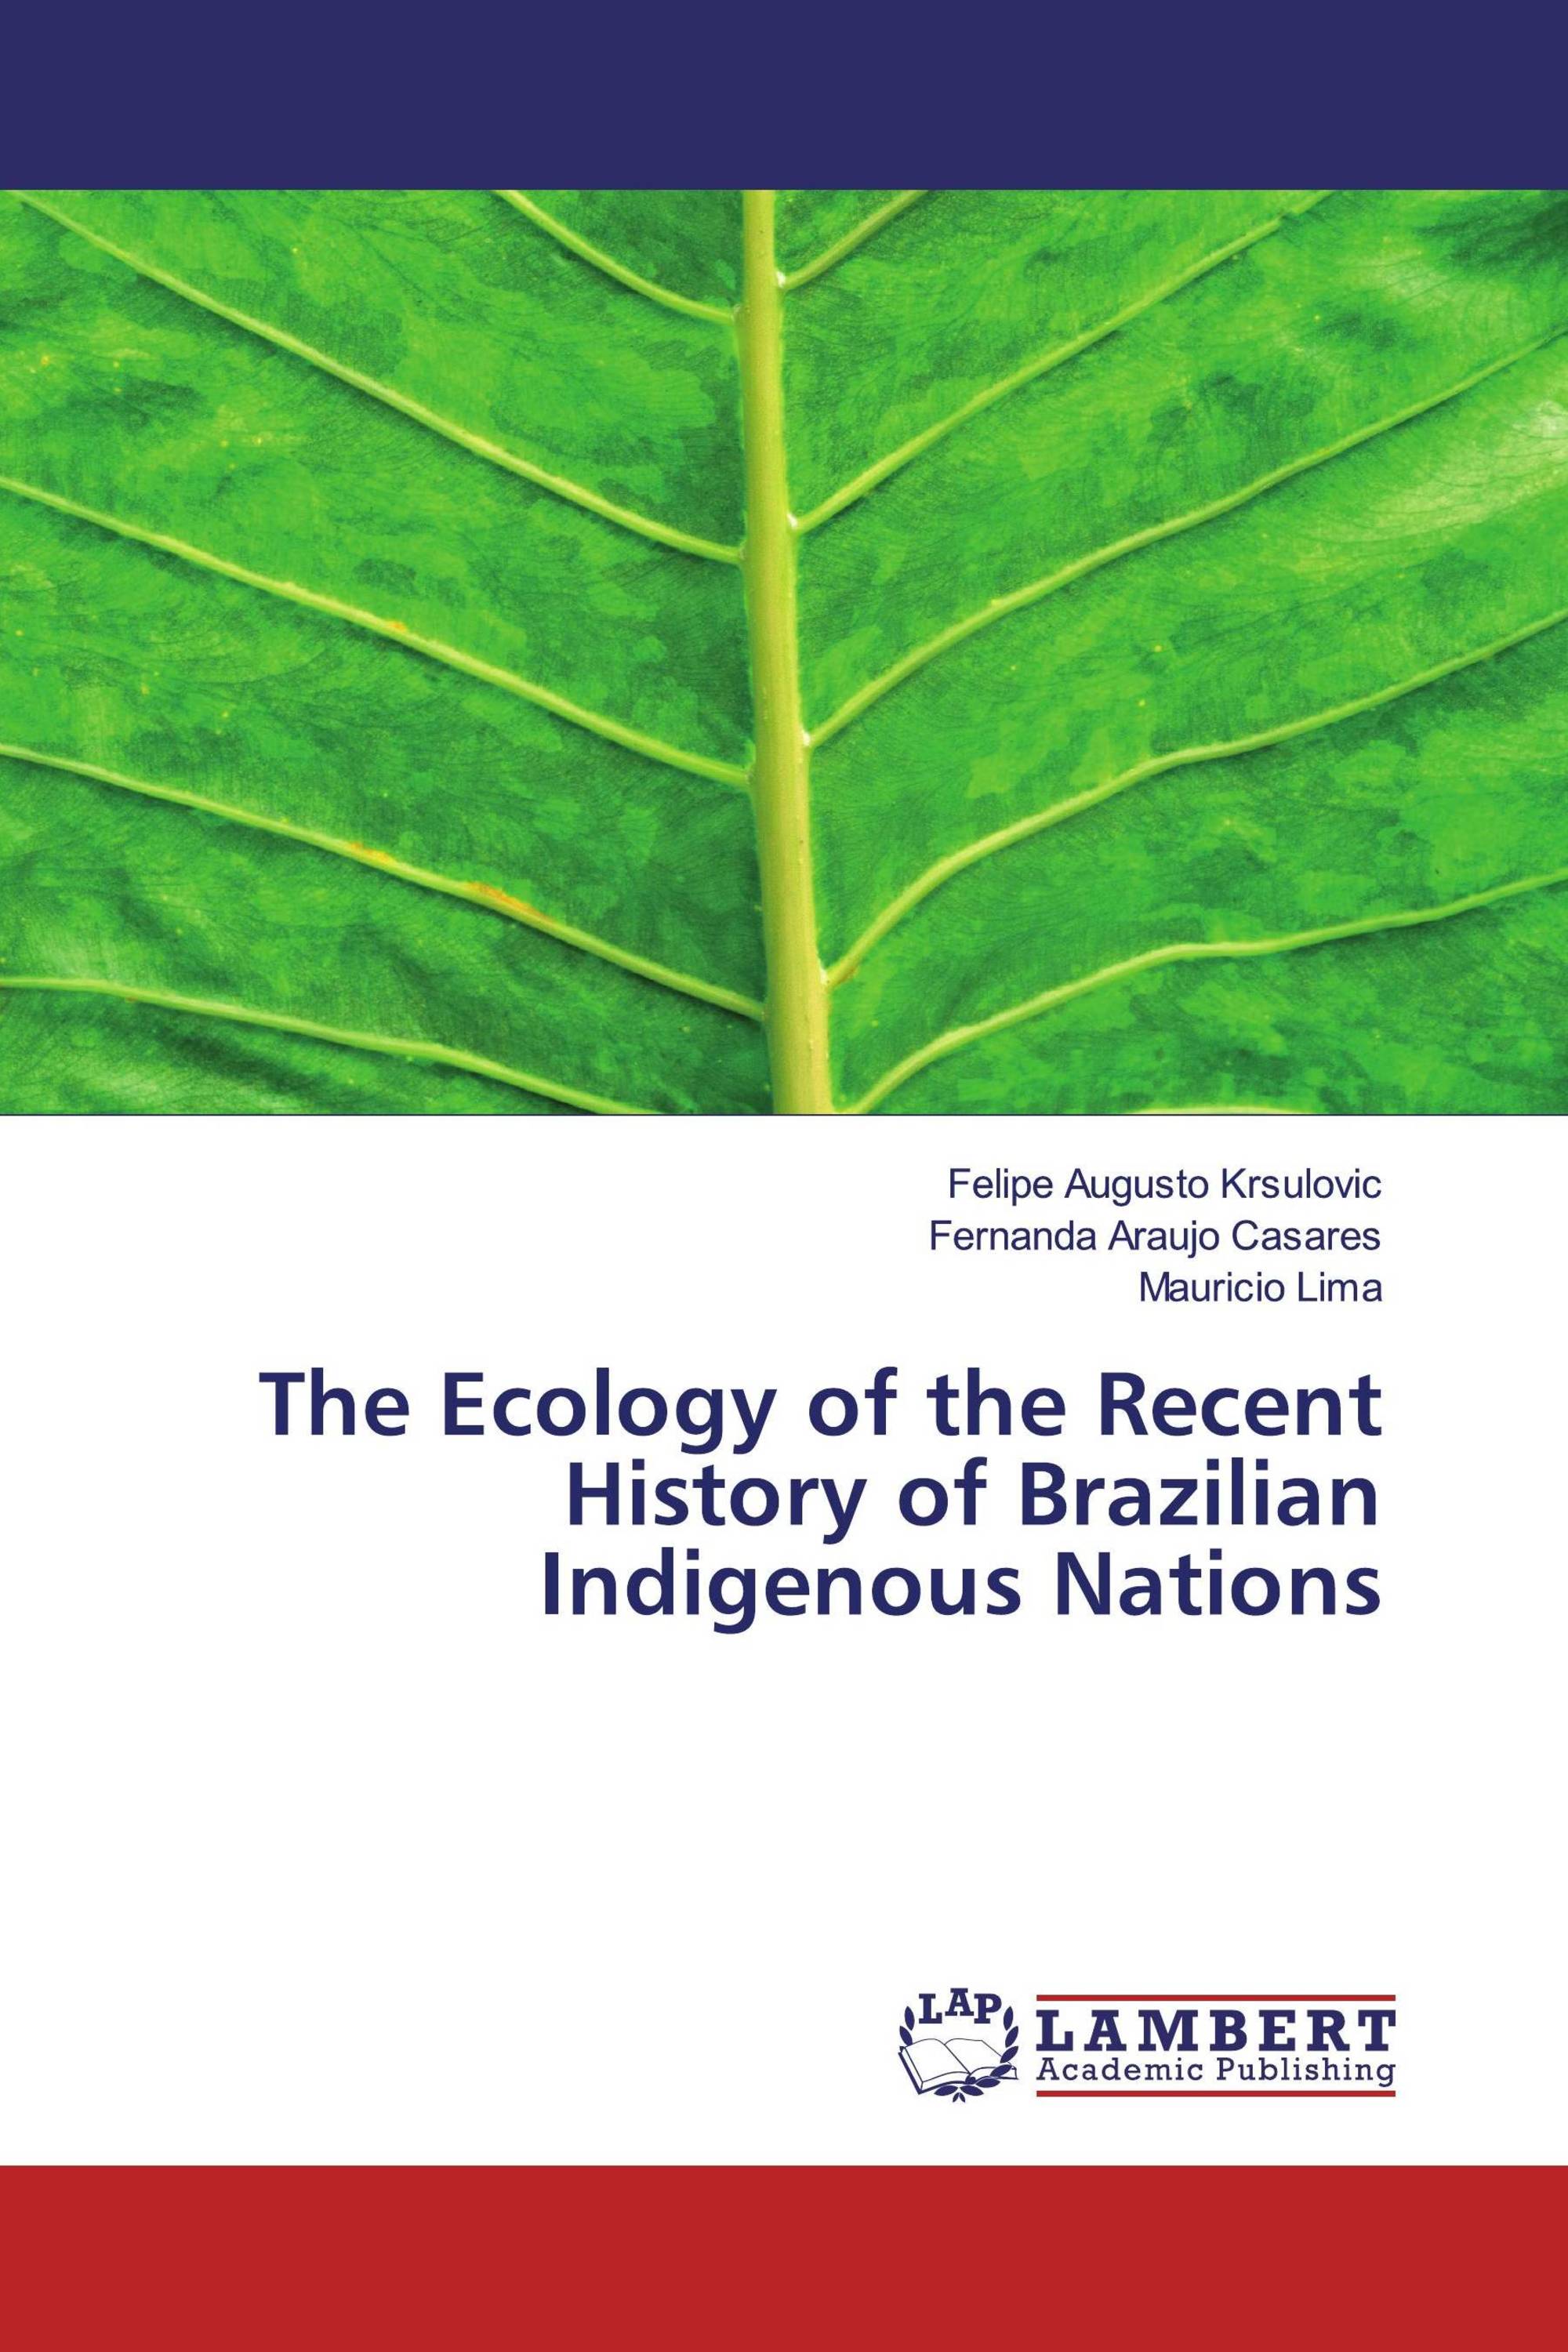 The Ecology of the Recent History of Brazilian Indigenous Nations